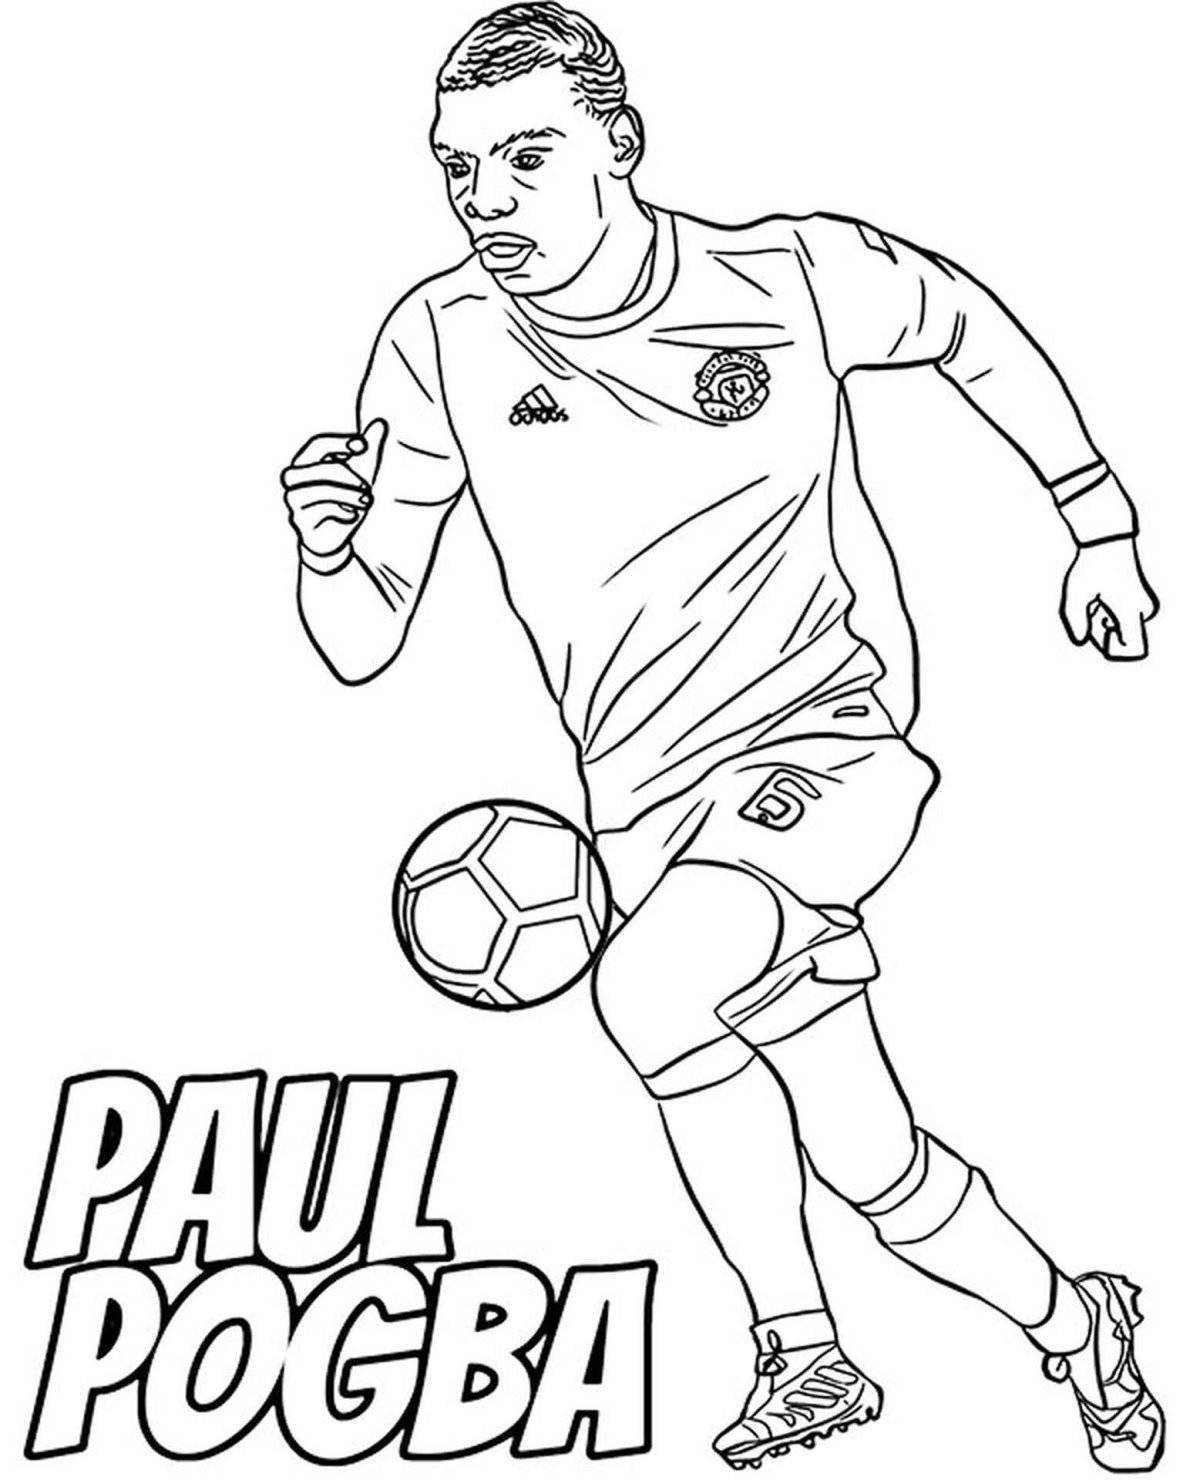 Amazing coloring book with famous football players